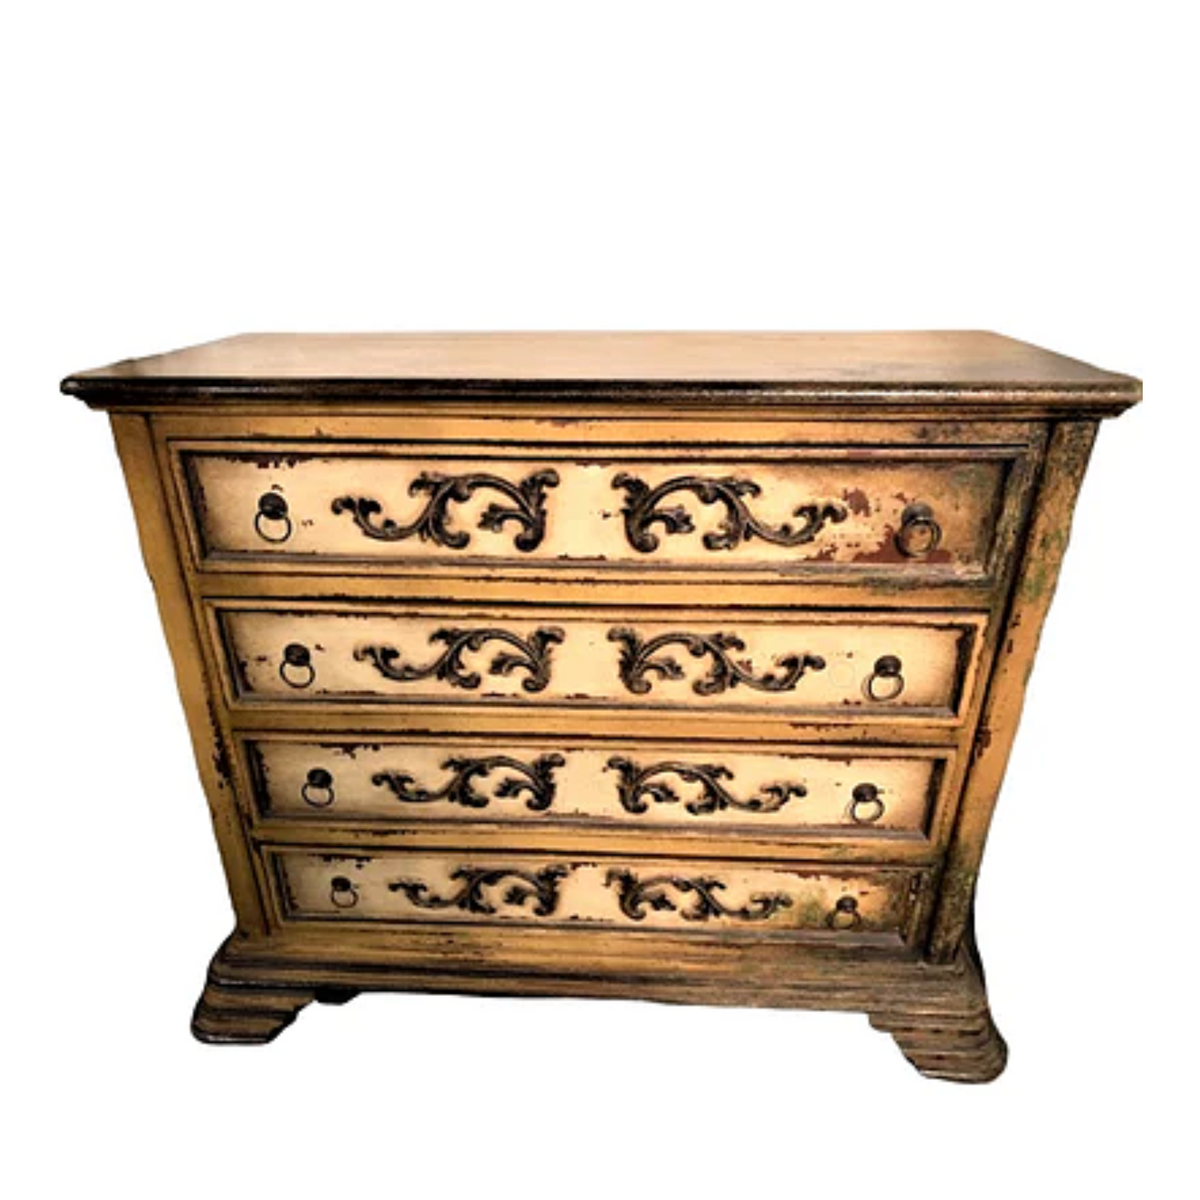 FRENCH STYLE HANDCRAFTED CHEST - 4 DRAWERS